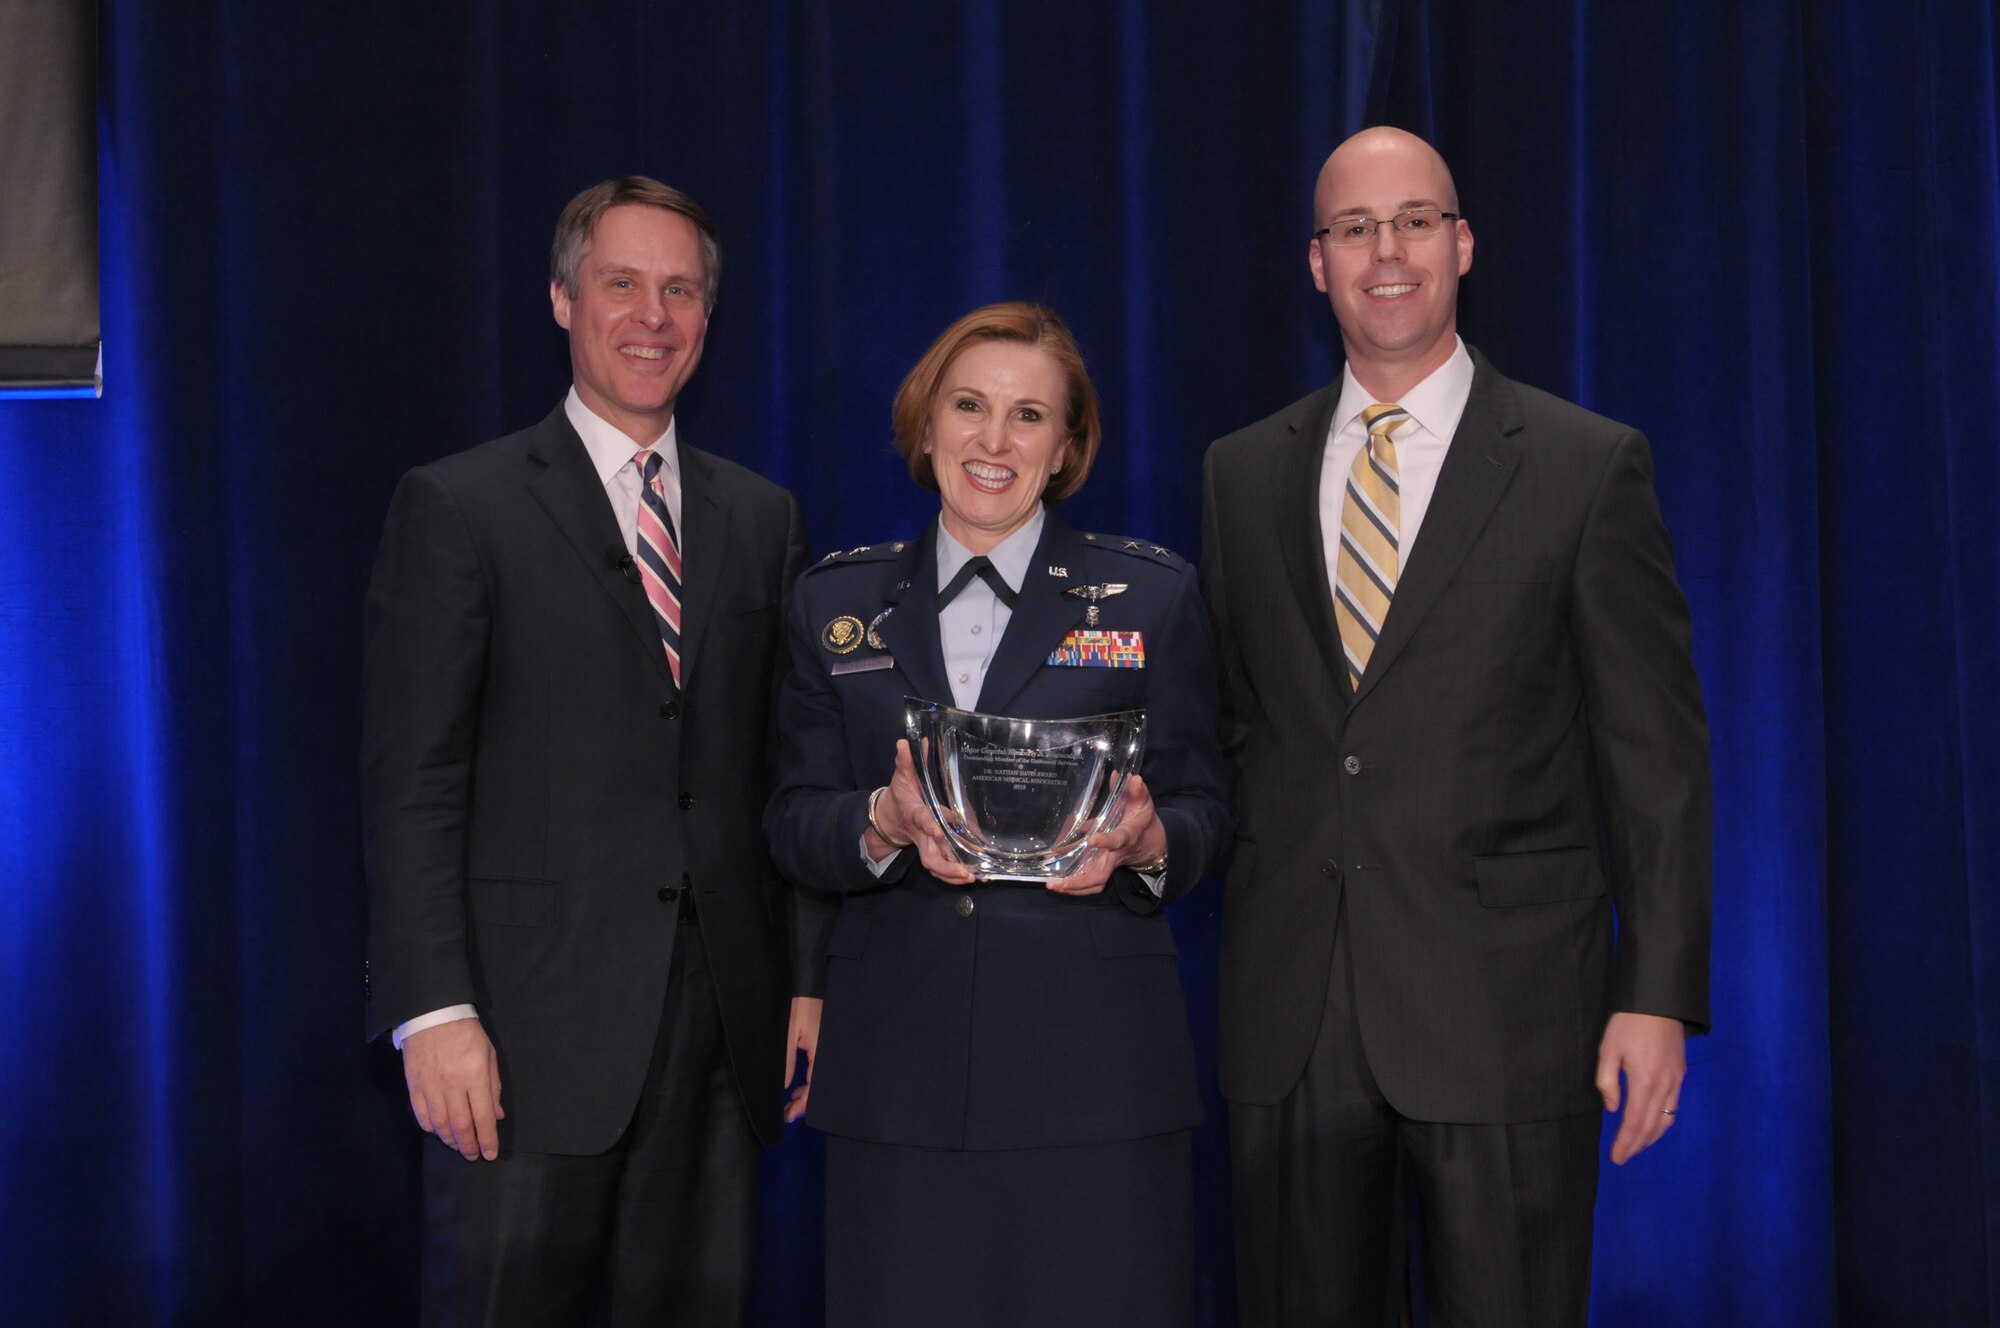 Assistant Air Force Surgeon General, medical force development and nursing services, Maj. Gen. Kimberly Siniscalchi, received the American Medical Association’s (AMA) top government service award in health care, the Dr. Nathan Davis Award for Outstanding Government Service. She was honored at the AMA’s National Advocacy Conference in Washington, D.C. on Feb 12, 2013. The group shot is with Terry Moran, co-anchor of ABC News "Nightline" (left) and AMA Board Chair Steven J. Stack, M.D. (right). (AMA courtesy photo)